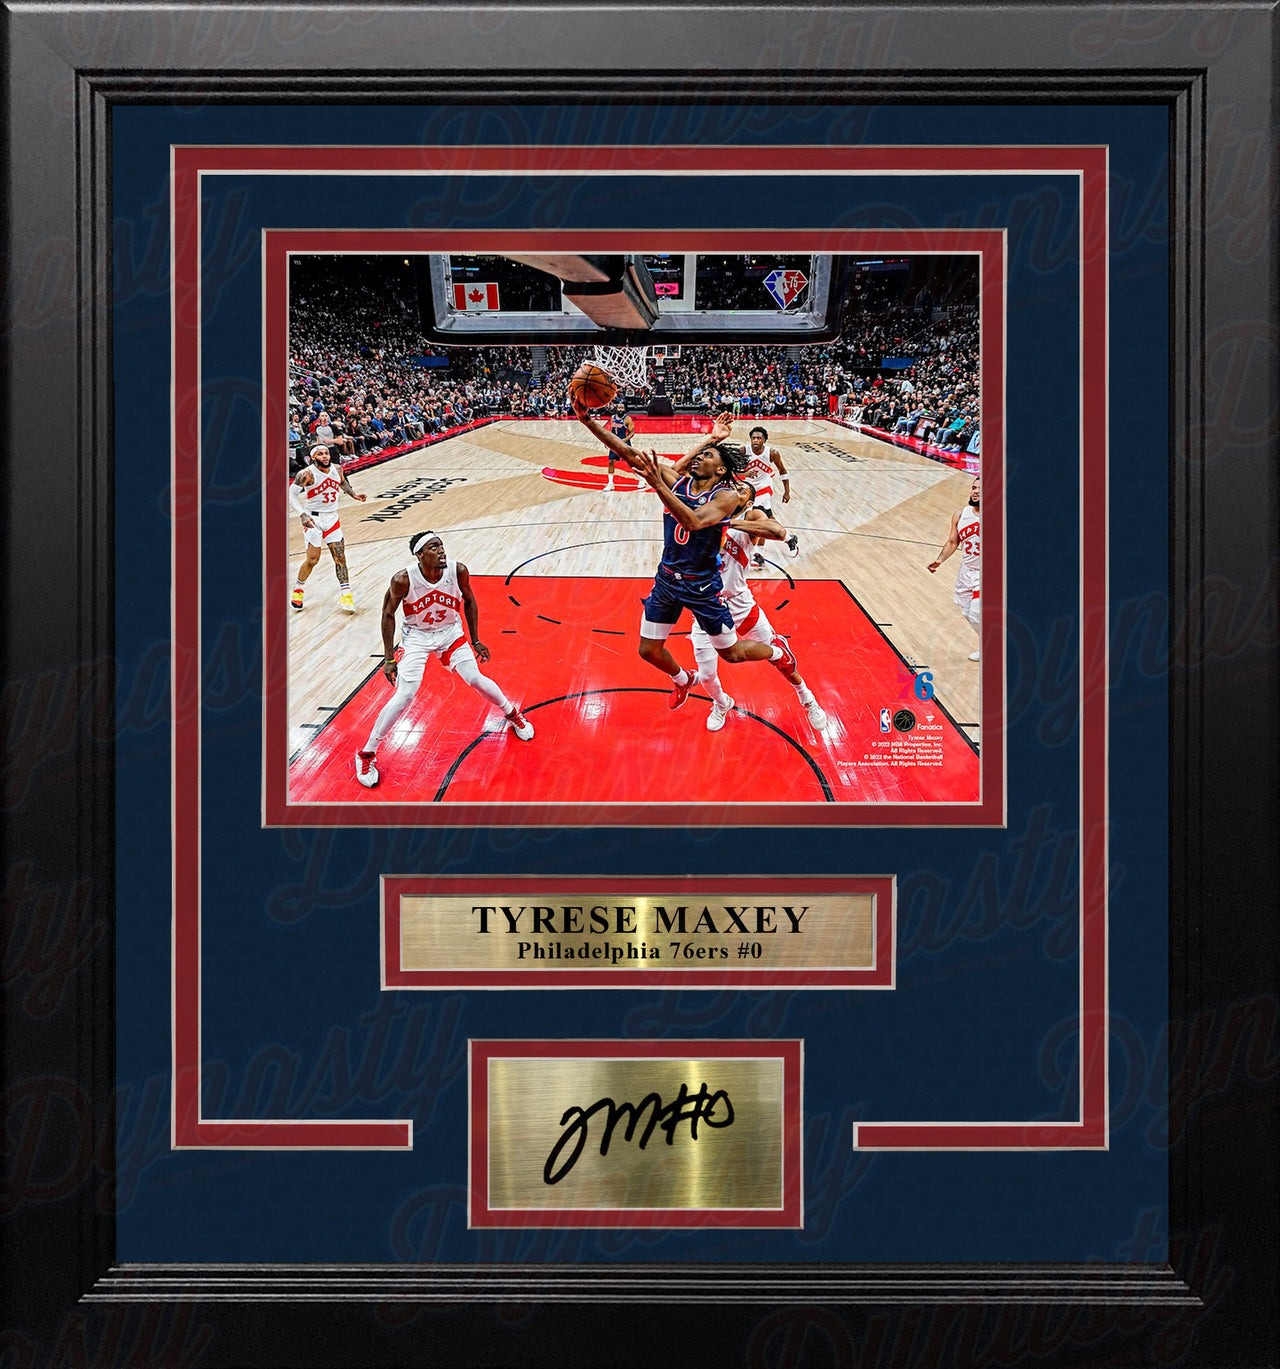 Tyrese Maxey City Edition Action Philadelphia 76ers 8" x 10" Framed Photo with Engraved Autograph